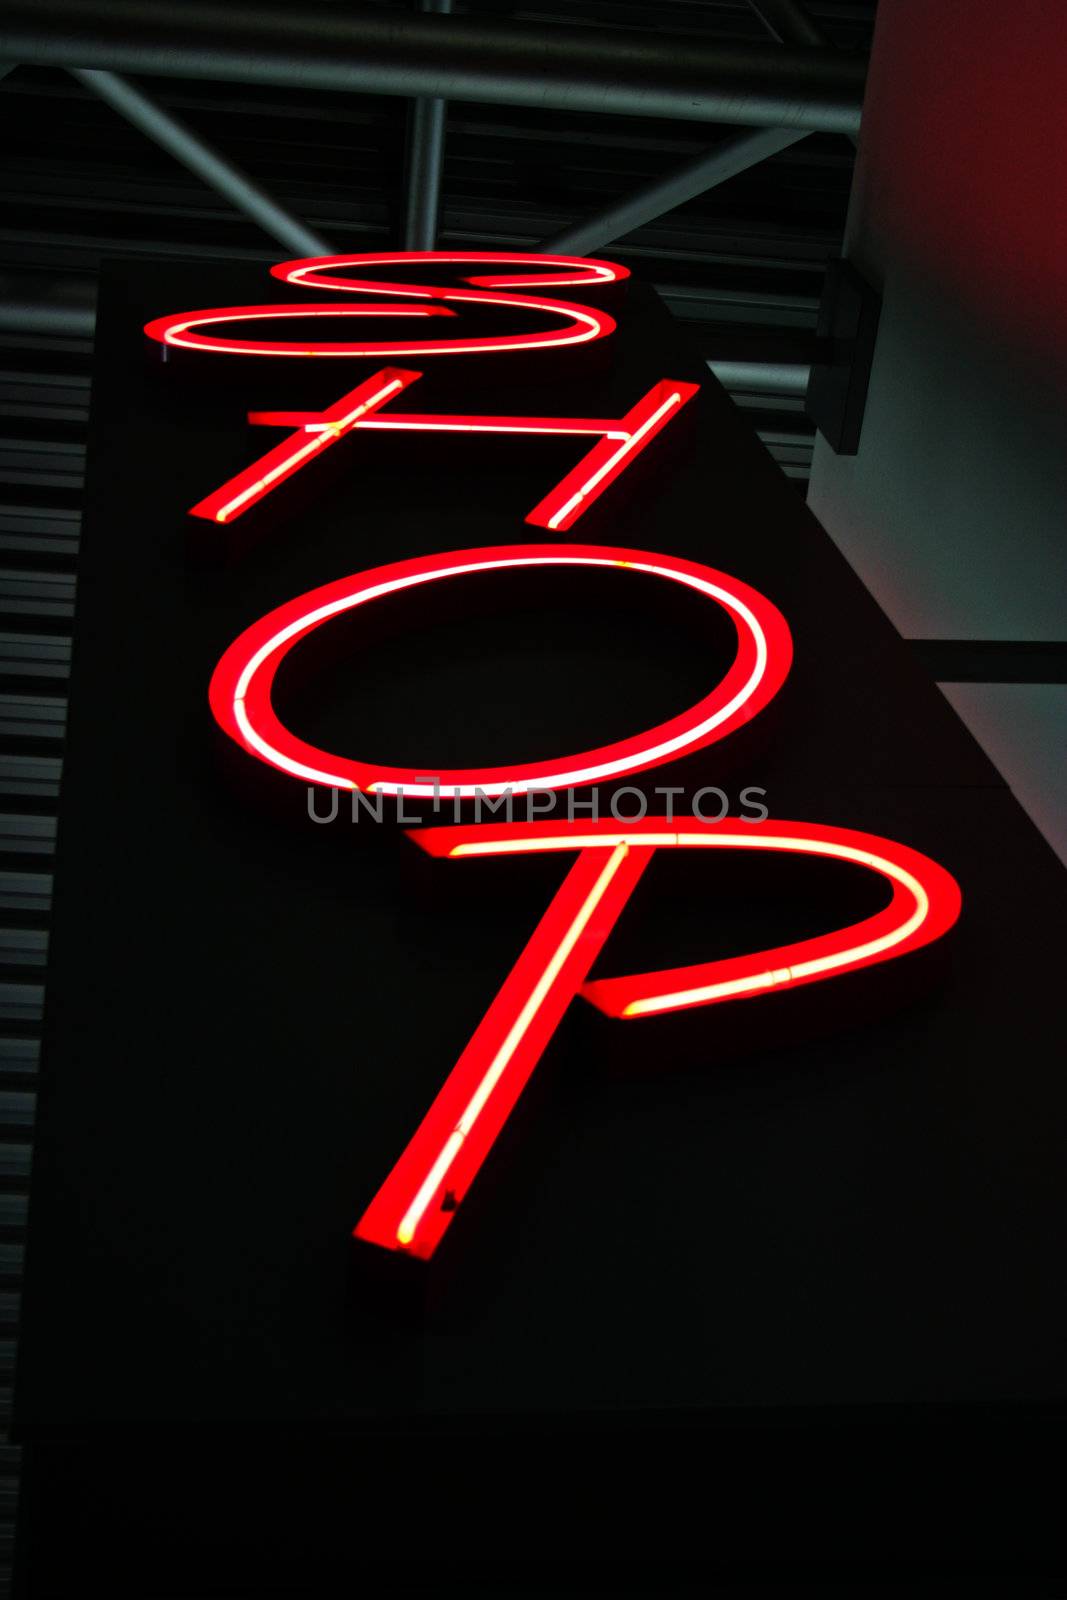 Red neon light as advertisement for a Shop